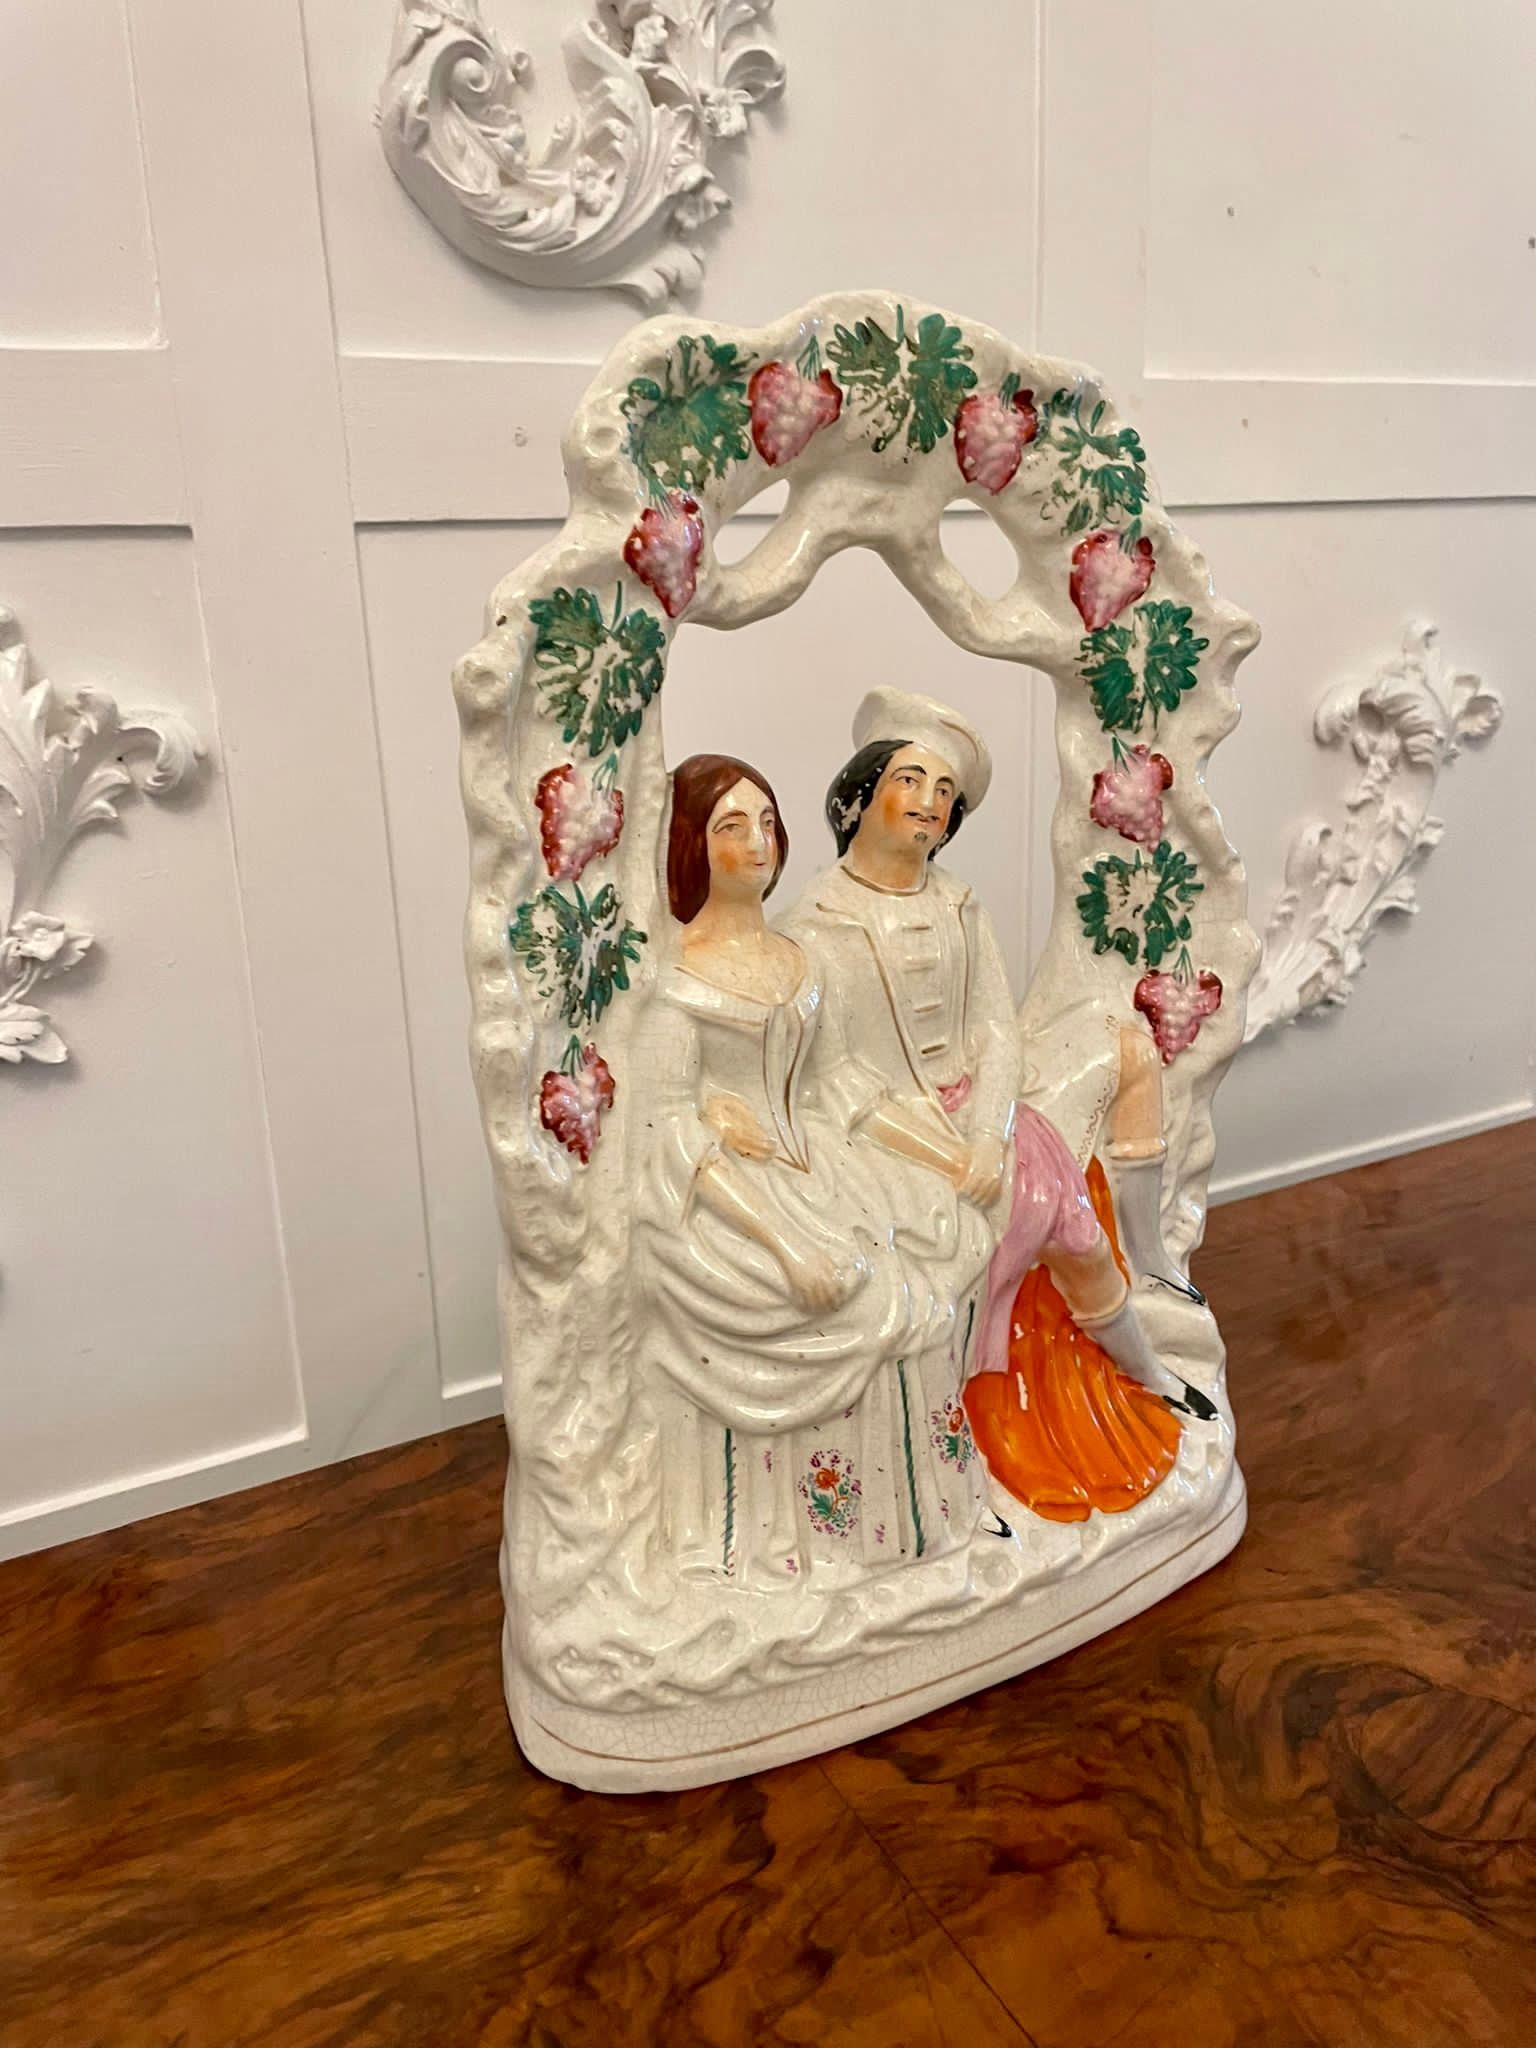 Antique 19th century antique Staffordshire flatback of a wedded couple seated under grape vines dressed in period wedding costume

A delightful piece which is beautifully colored and in perfect condition

Dimensions:
H 35.5 x W 24 x D